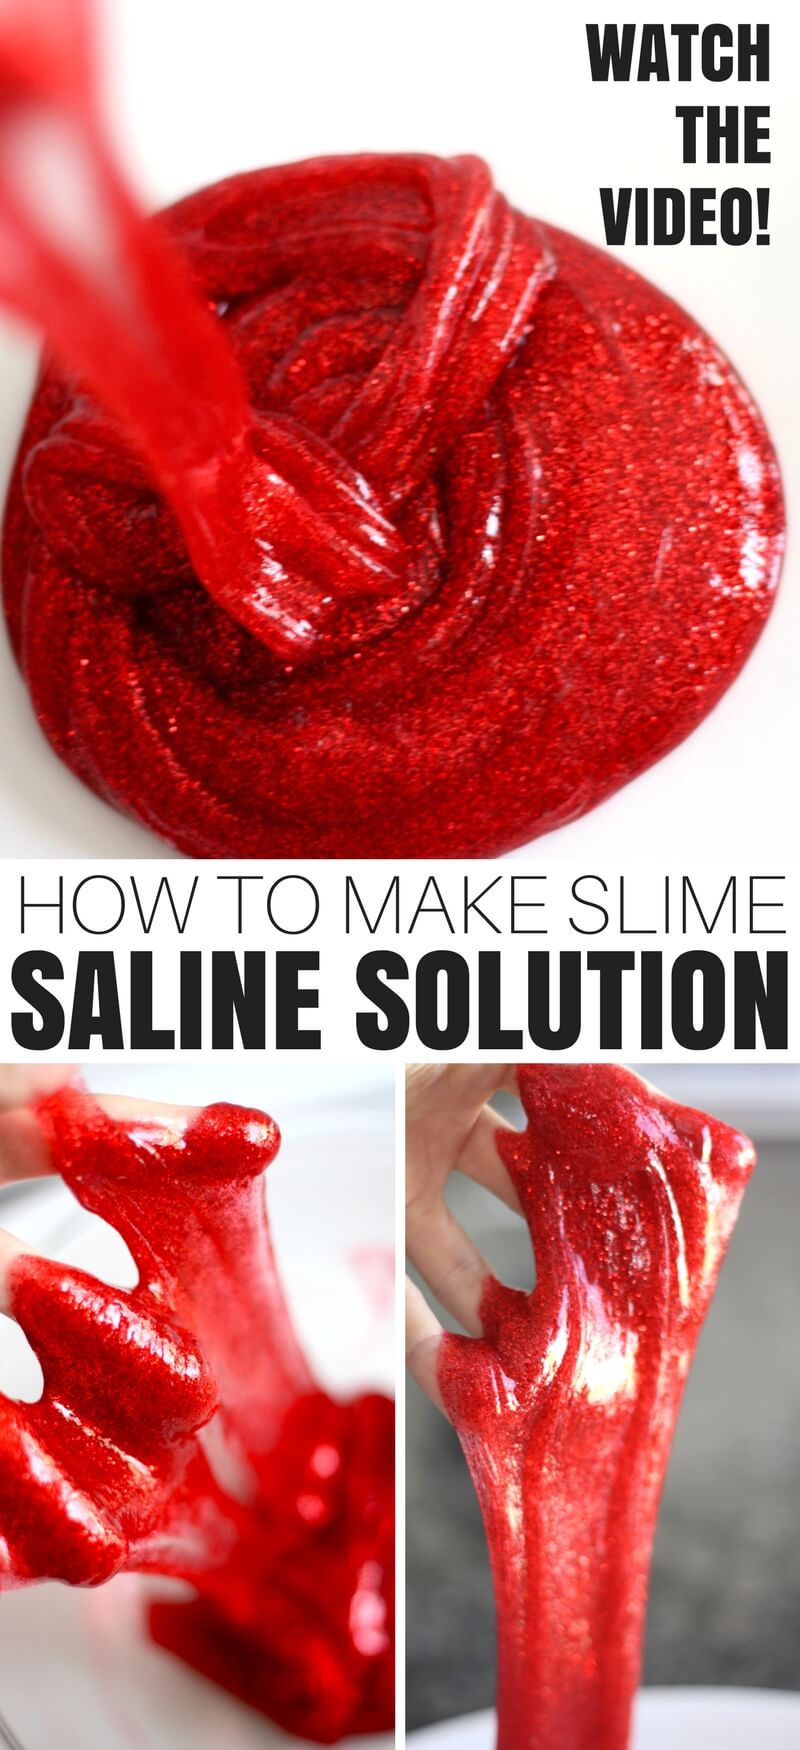 How To Make Saline Solution Slime Recipe for Kid's Science